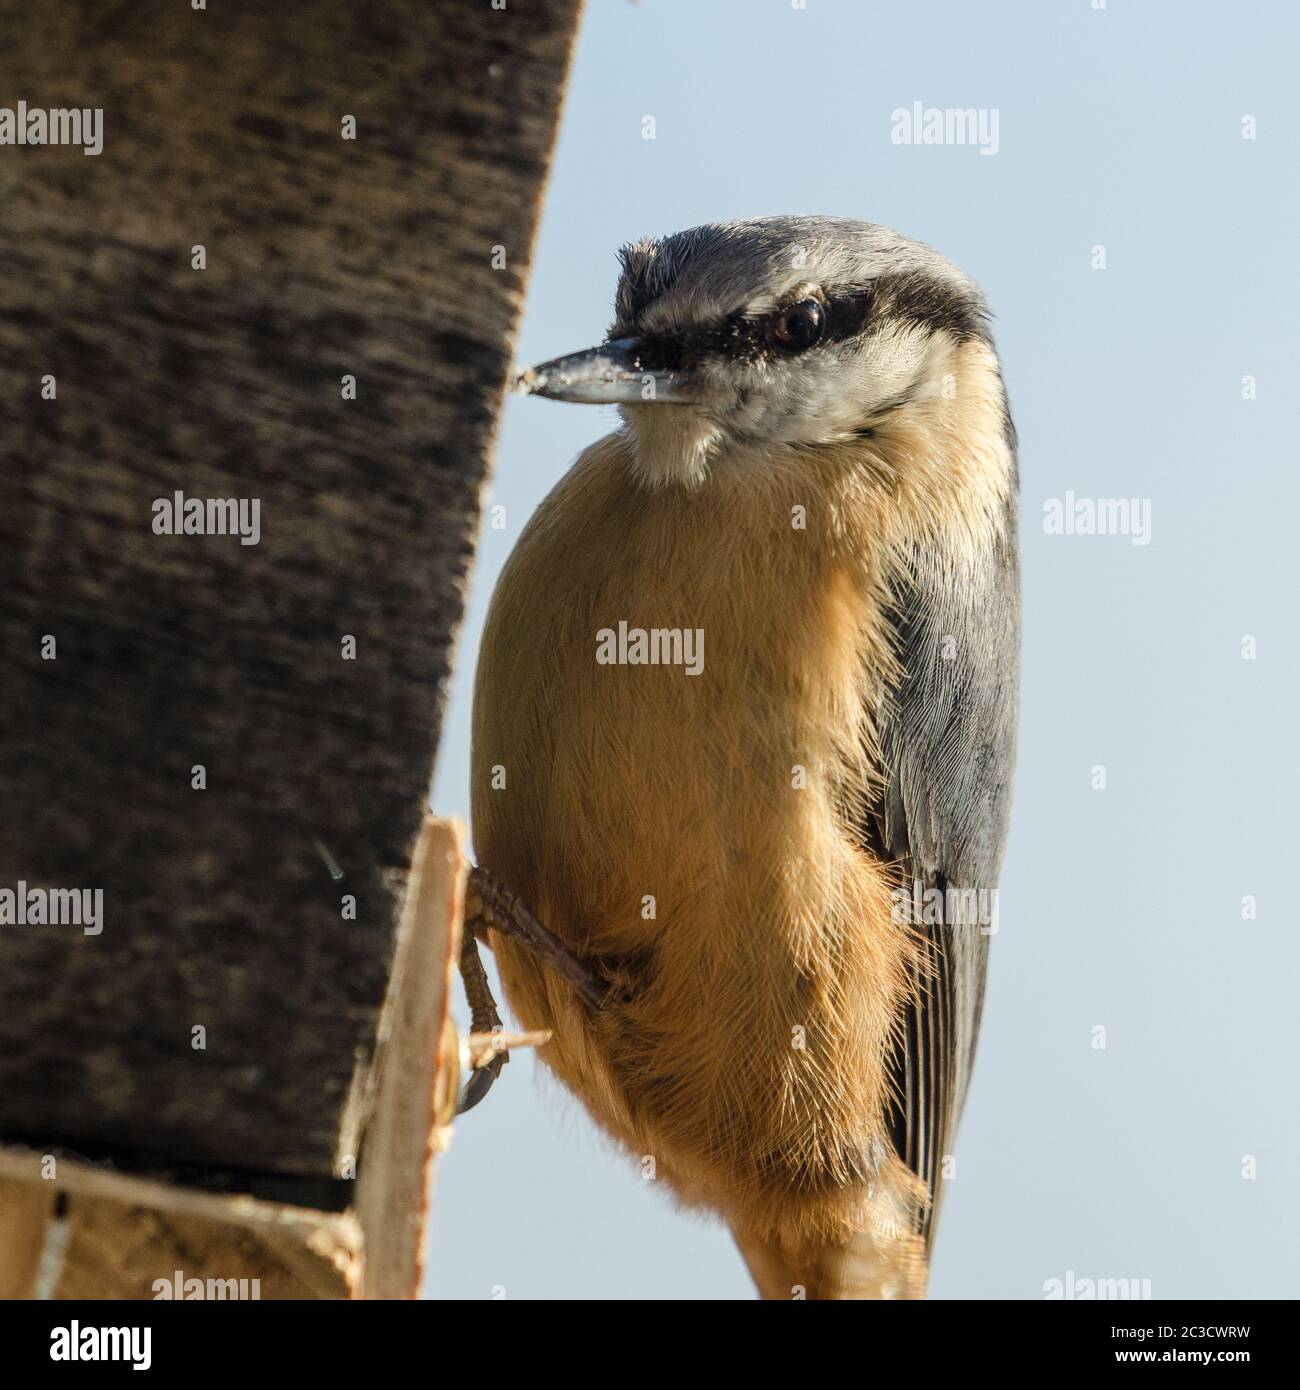 Looking to you! A nuthatch at a birdhouse Stock Photo